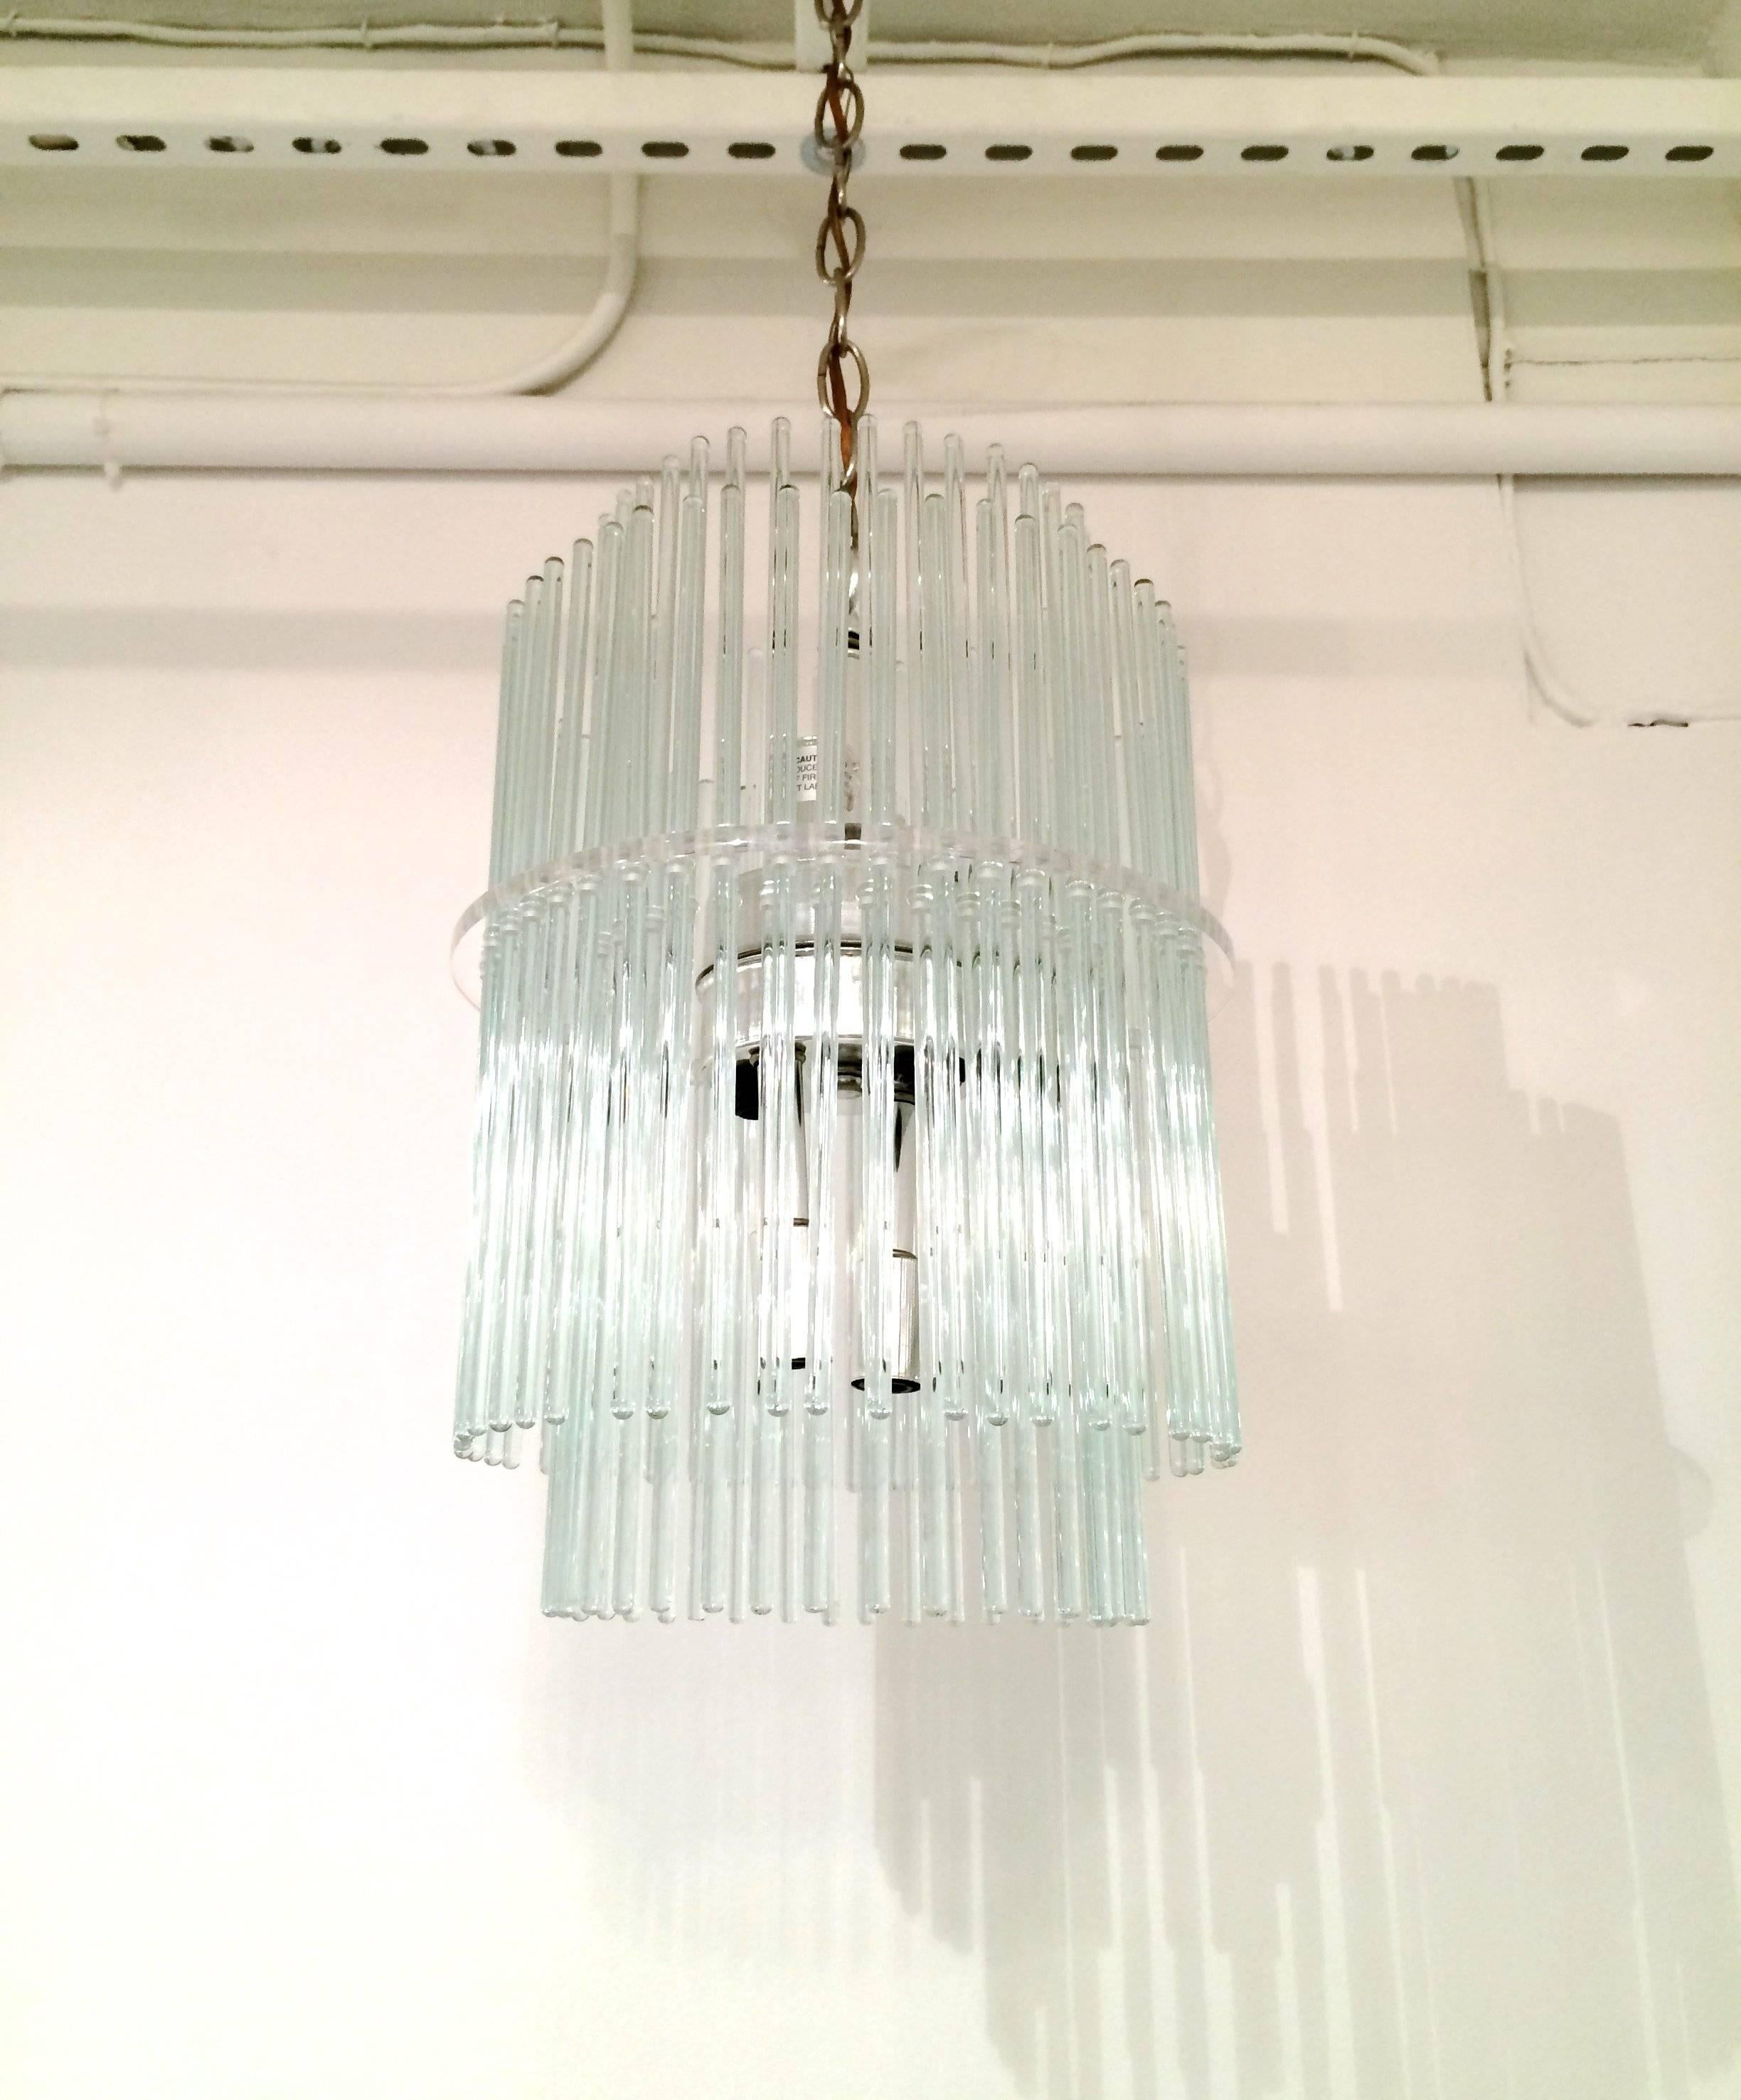 Two tier glass rod and Lucite chandelier by Gaetano Sciolari for Lightolier. Eight chrome sockets and fittings. Measures 17